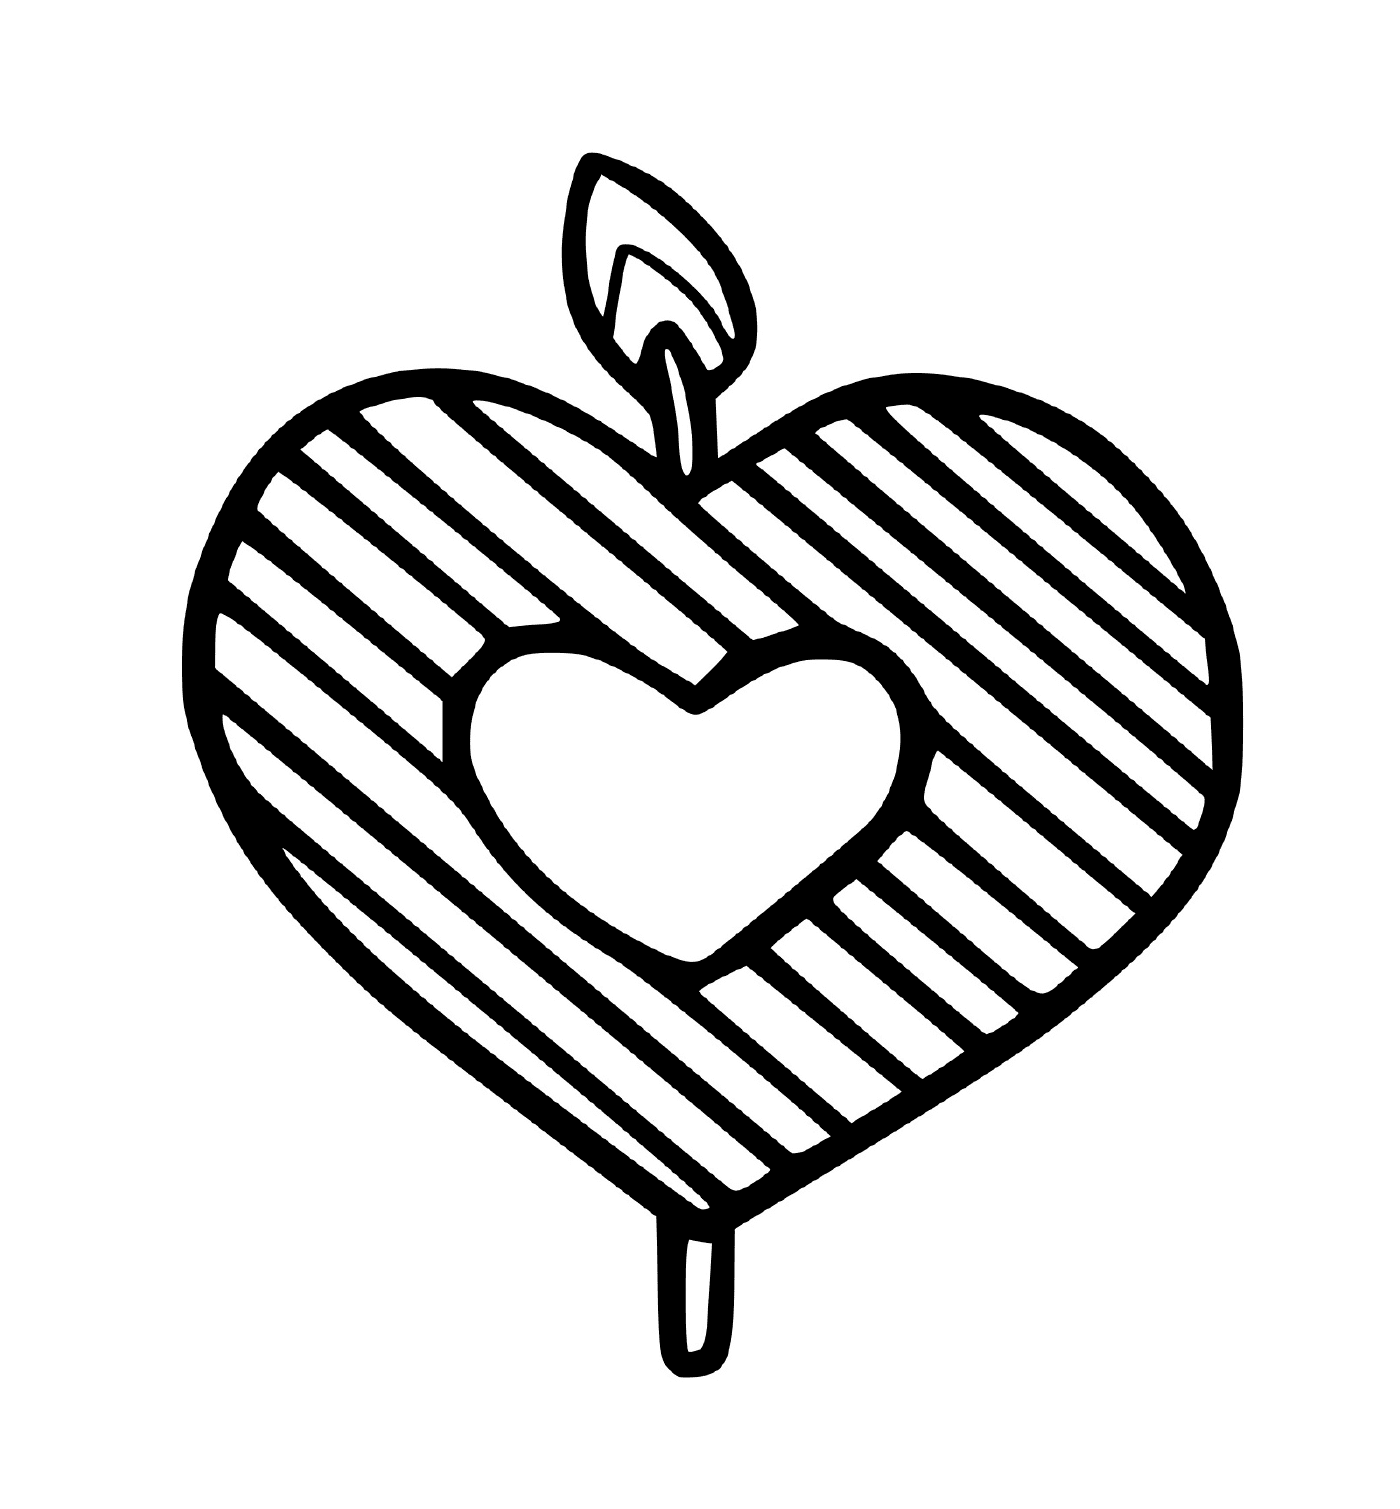  Heart-shaped candle 